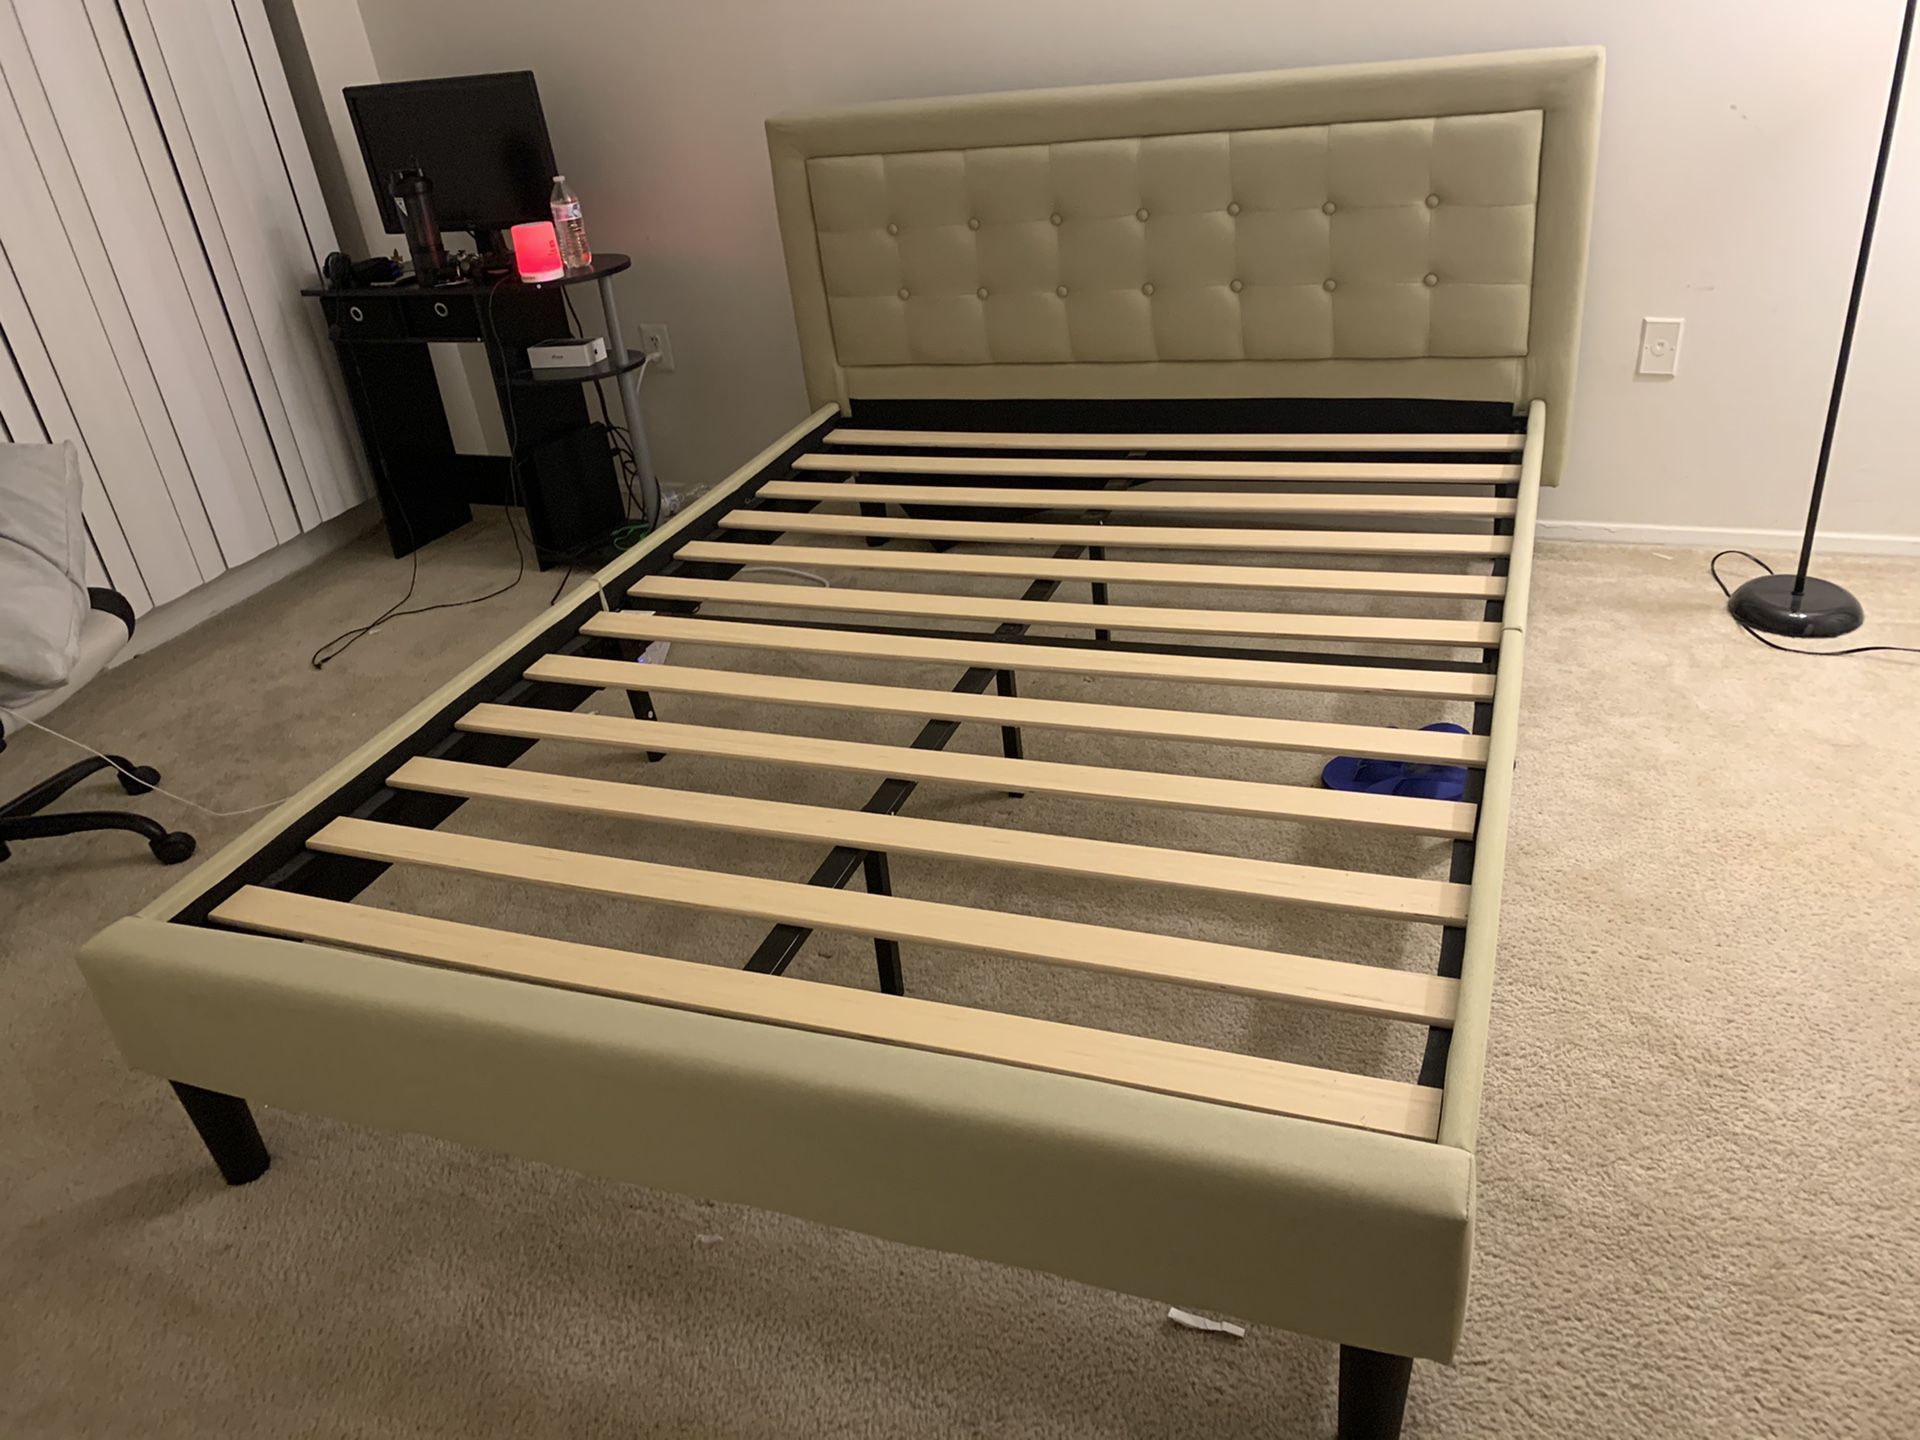 Queen sized Mornington upholstered bed frame with headboard